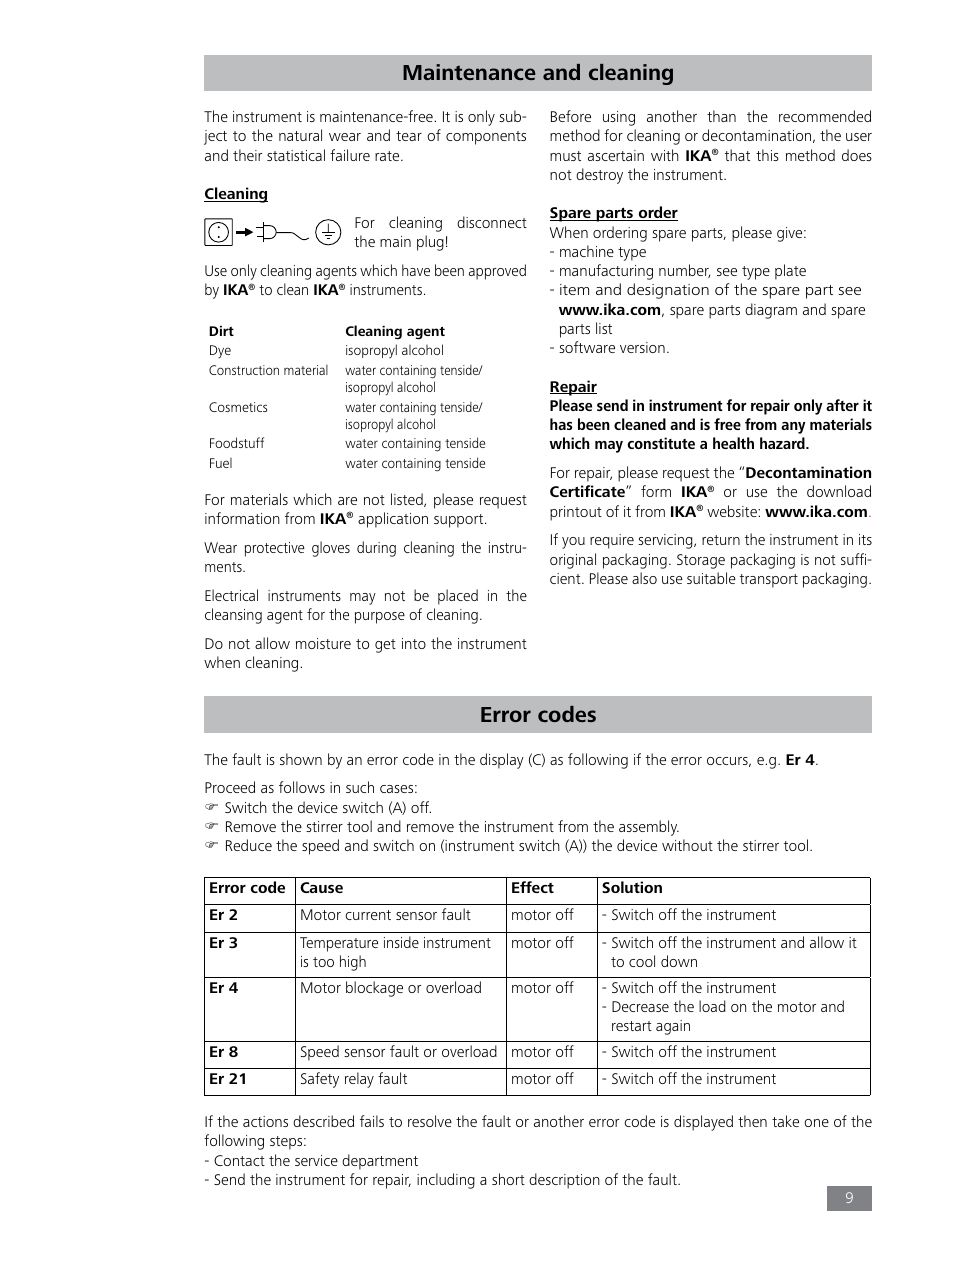 Maintenance and cleaning, Error codes | IKA EUROSTAR 200 digital User Manual | Page 9 / 12